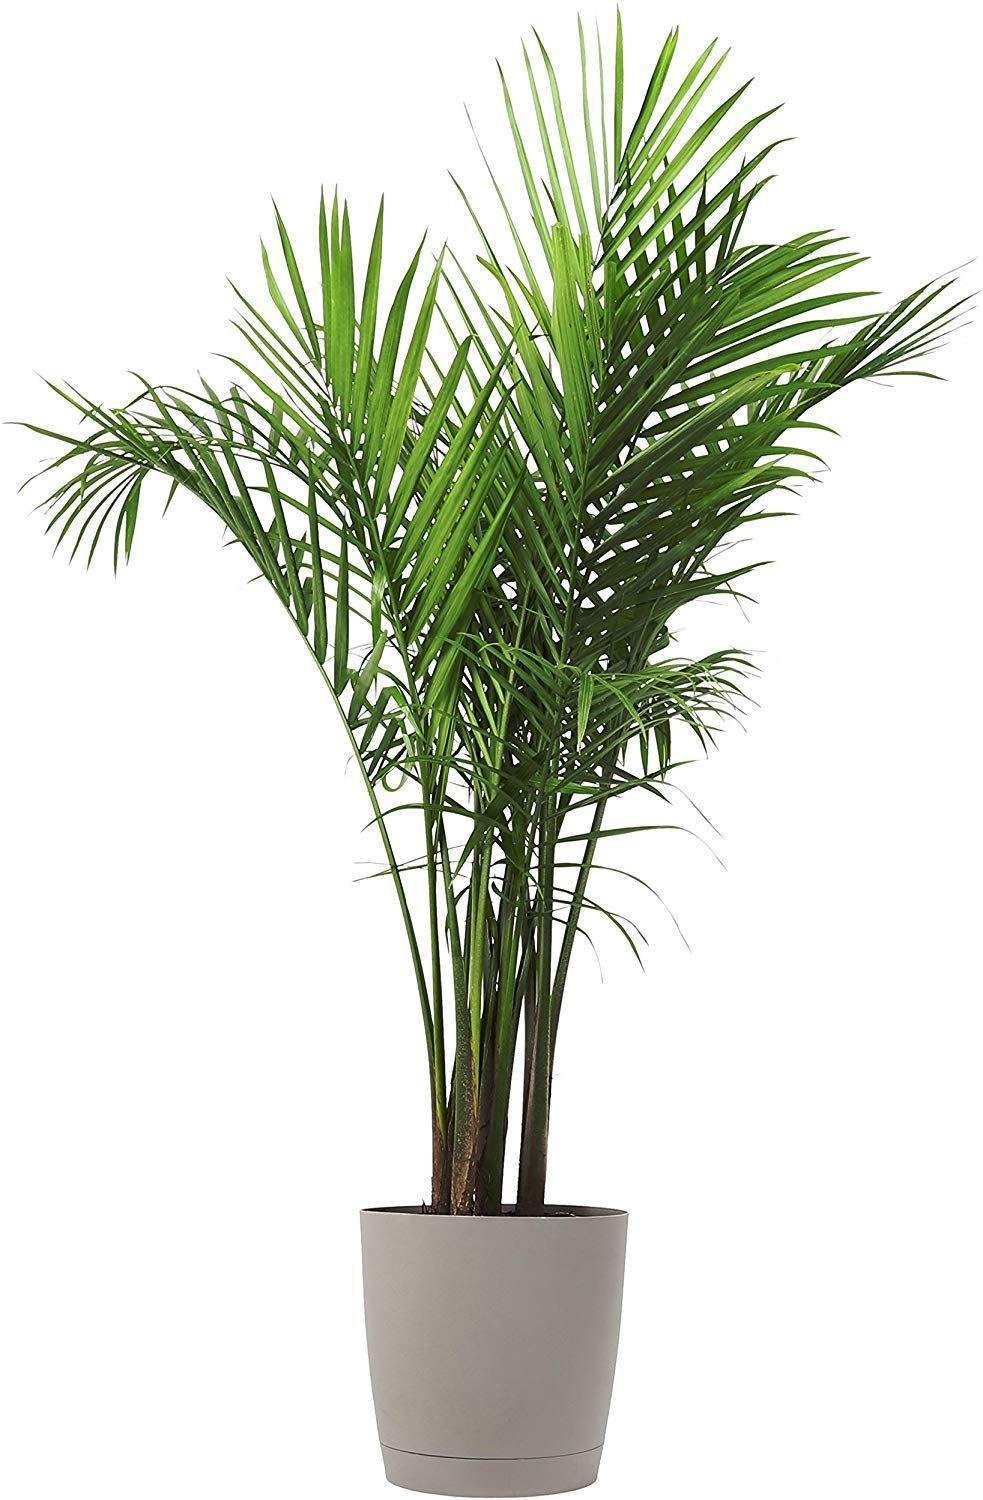 Palm plant for your home: Facts, physical description, types, growth, maintenance, uses and toxicity 2